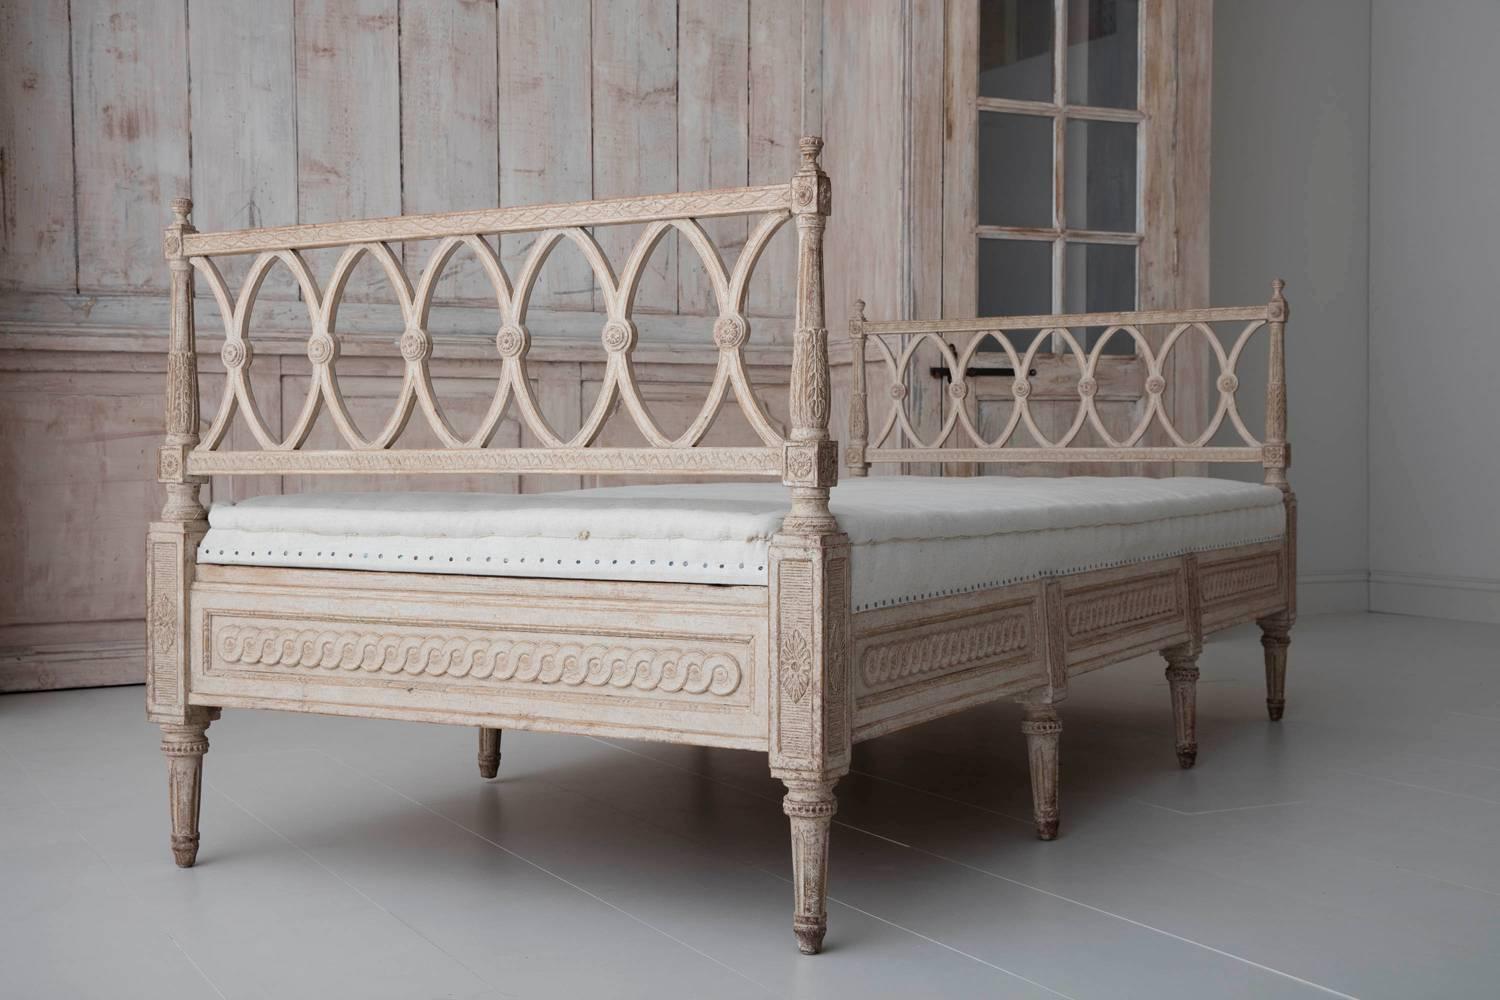 This is a beautifully carved Swedish Gustavian Style freestanding daybed, newly upholstered in hand-stiched linen. The sides are decorated with acanthus leaves and rosettes. The frame is finished on all four sides and features Guilloché carvings